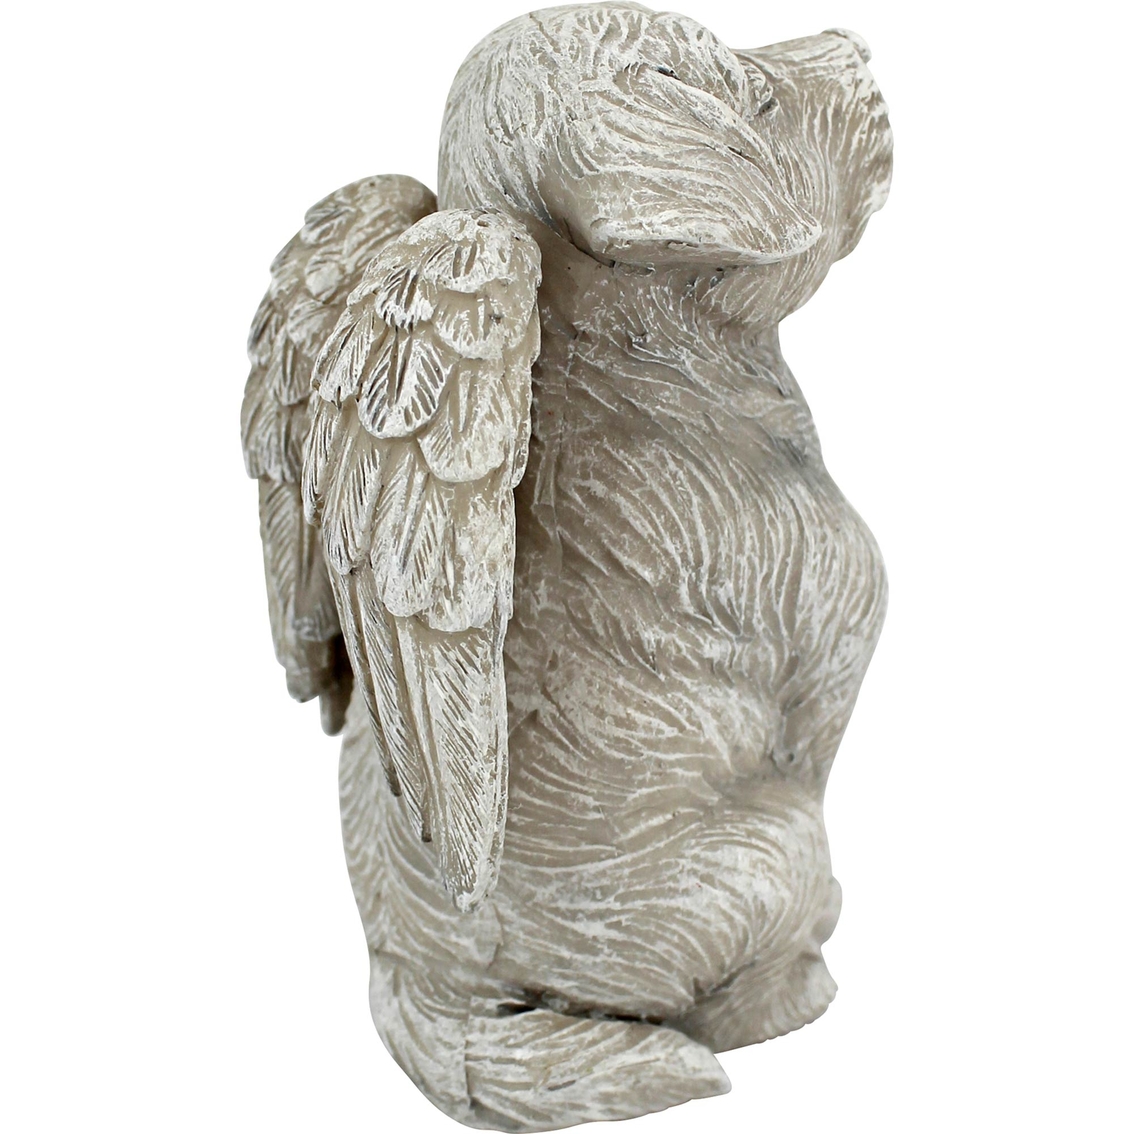 Design Toscano Forever in Our Hearts Memorial Dog Statue - Image 4 of 4